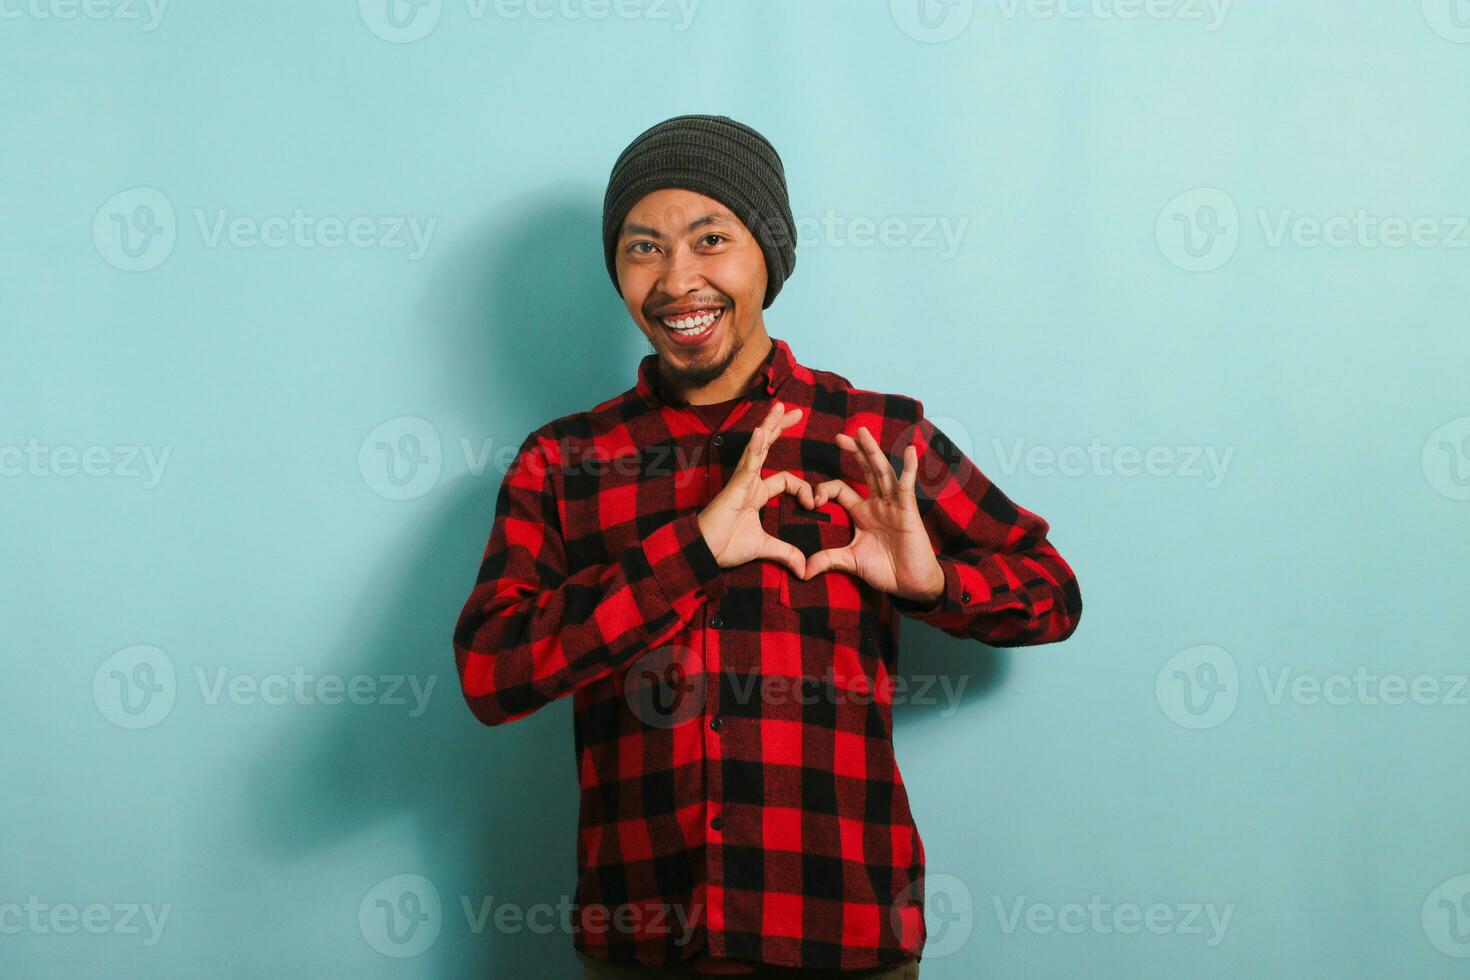 Smiling young Asian man shows a love gesture with his hand while standing against a blue background photo